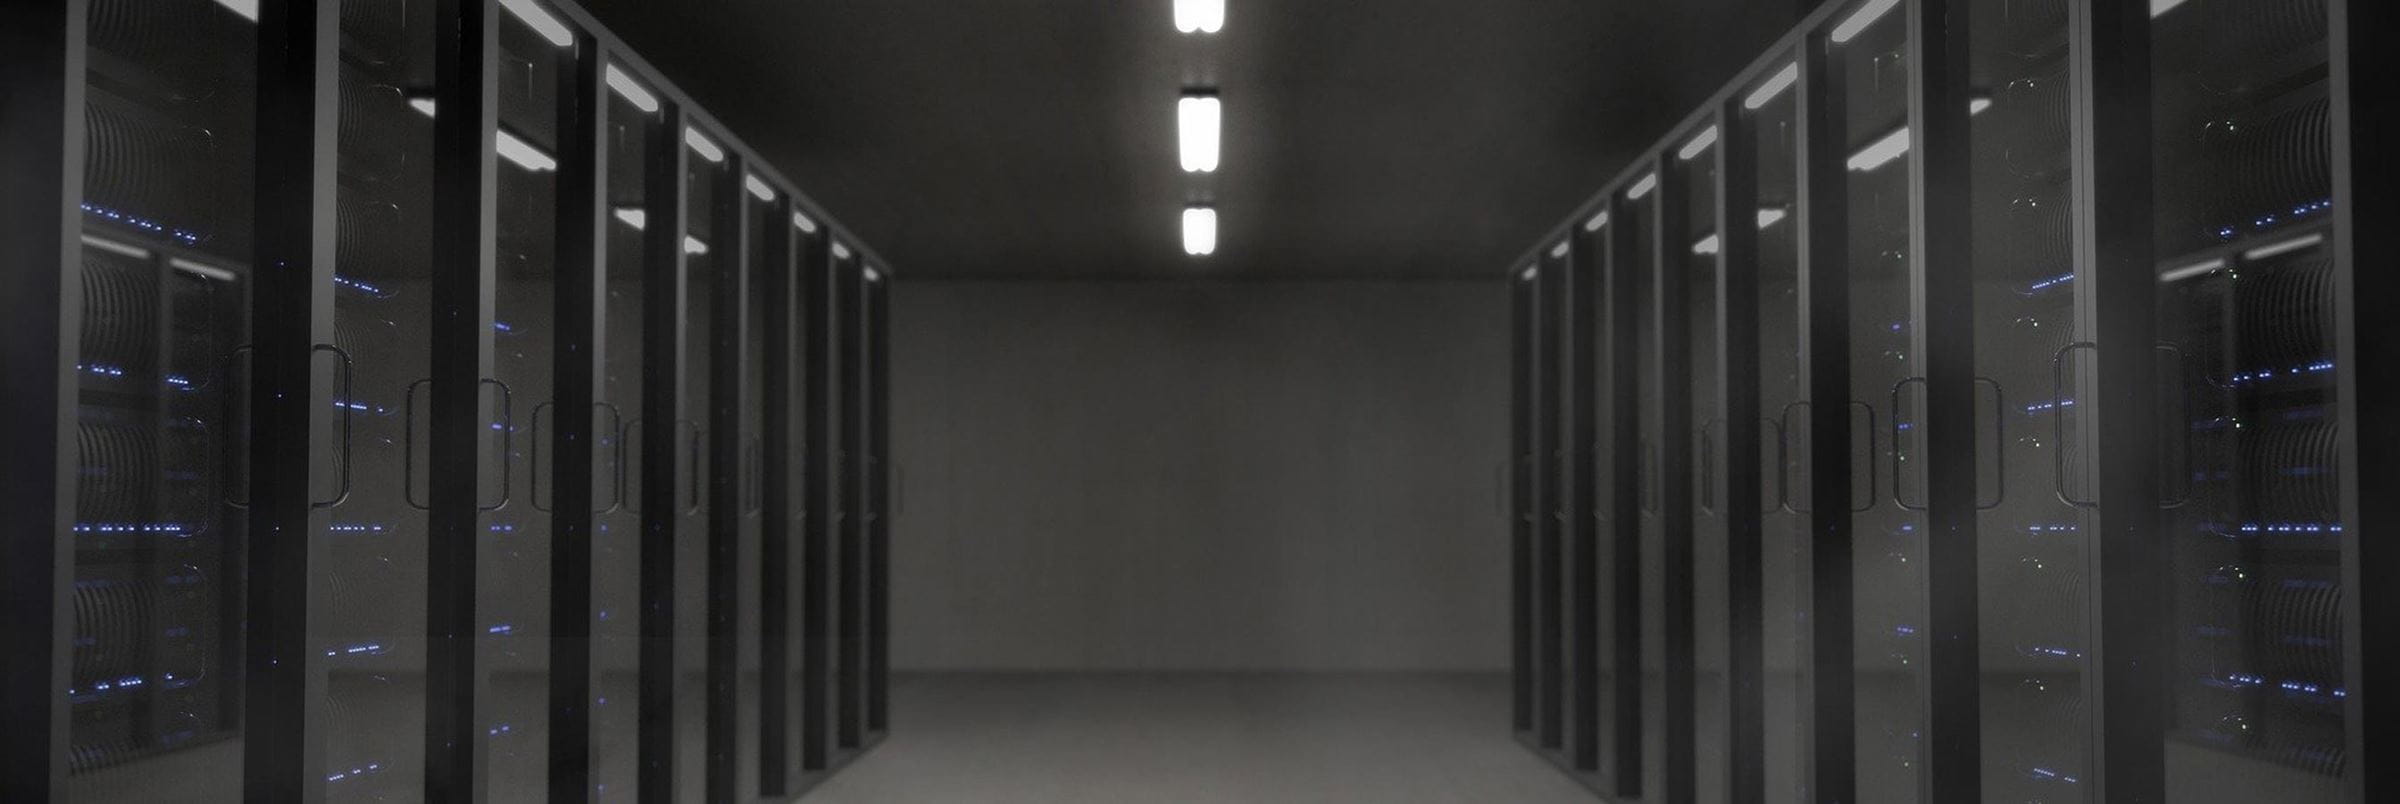 Two rows of data centre server racks in black, with a central path. A central strip of lights overhead providing sparse light to the gloomy conditions.